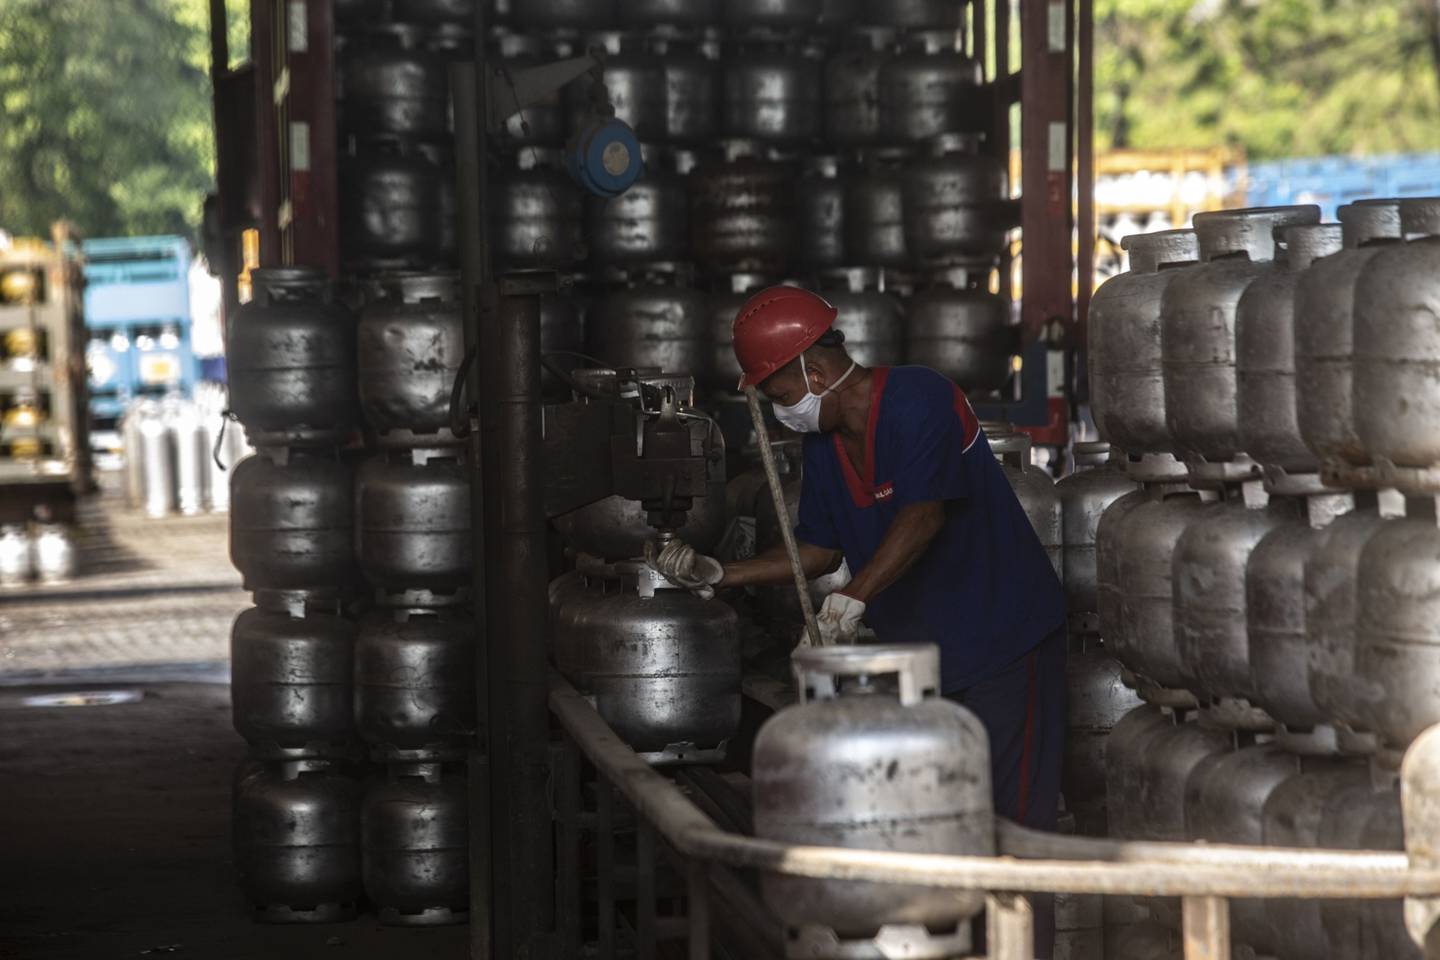 A worker loads cooking gas canisters onto a delivery truck near the Petroleo Brasileiro SA (Petrobras) Duque de Caxias Refinery (Reduc) refinery in Duque de Caxias, Rio de Janeiro state, Brazil, on Monday, Oct. 4, 2021.dfd